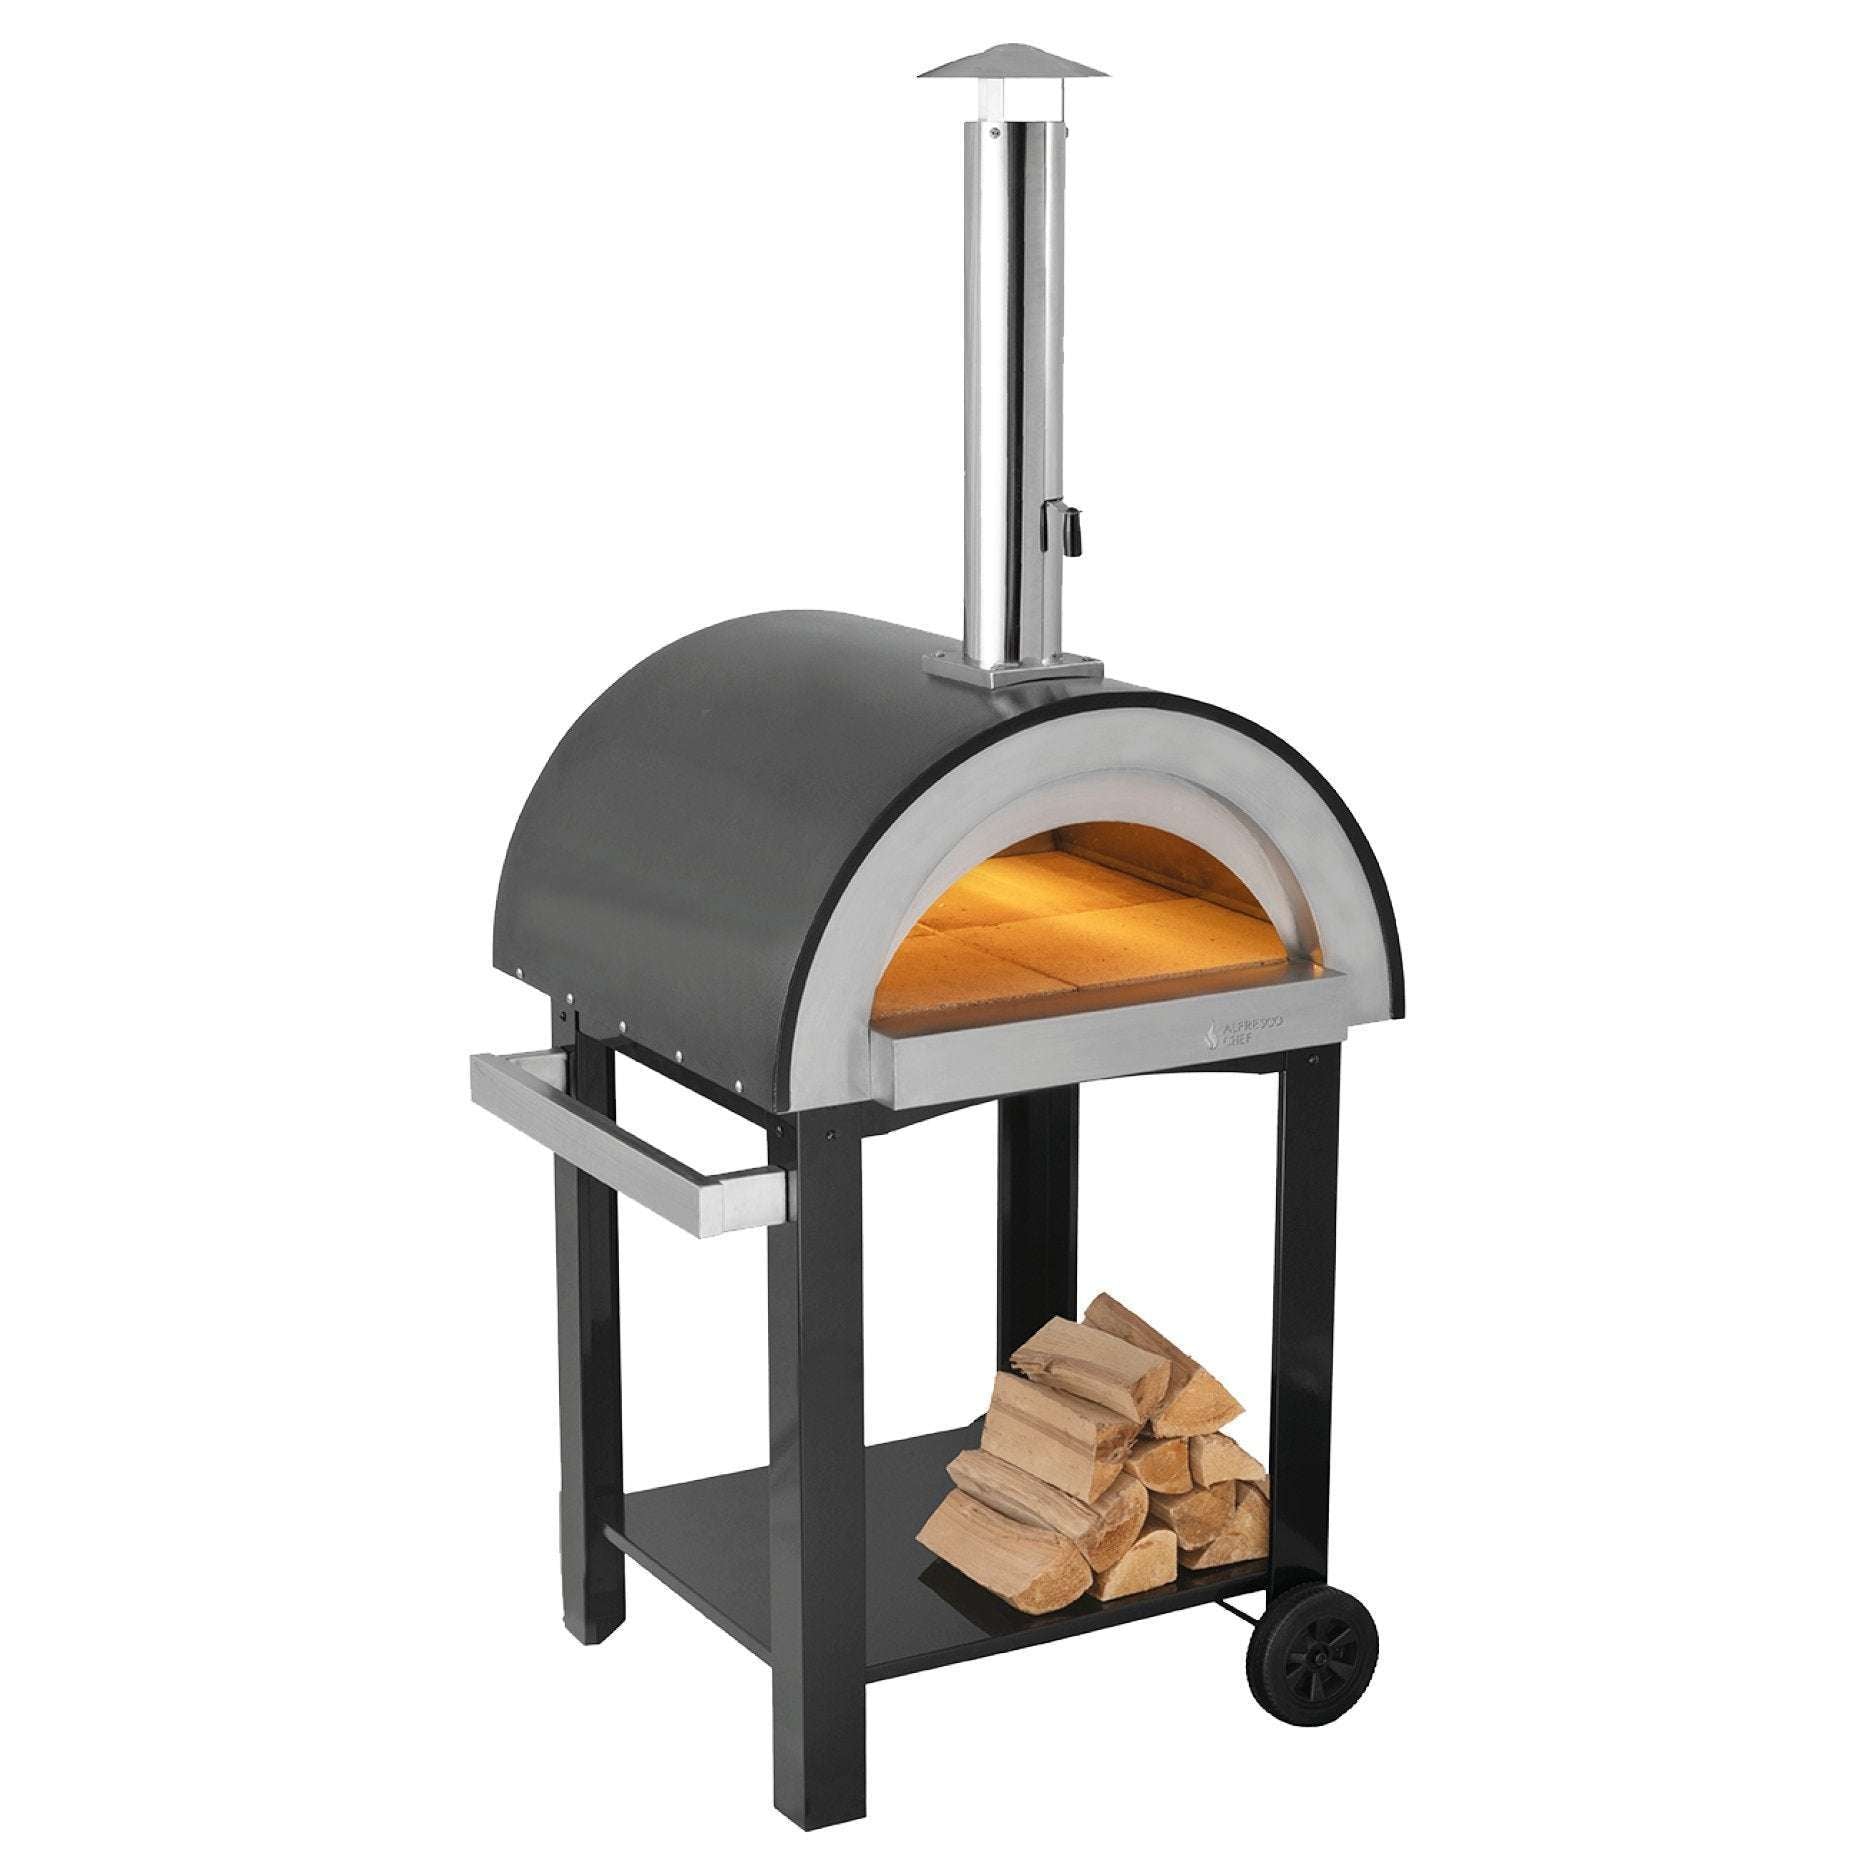 Exceptional Garden:Alfresco Chef Roma Wood Fired Outdoor Pizza Oven